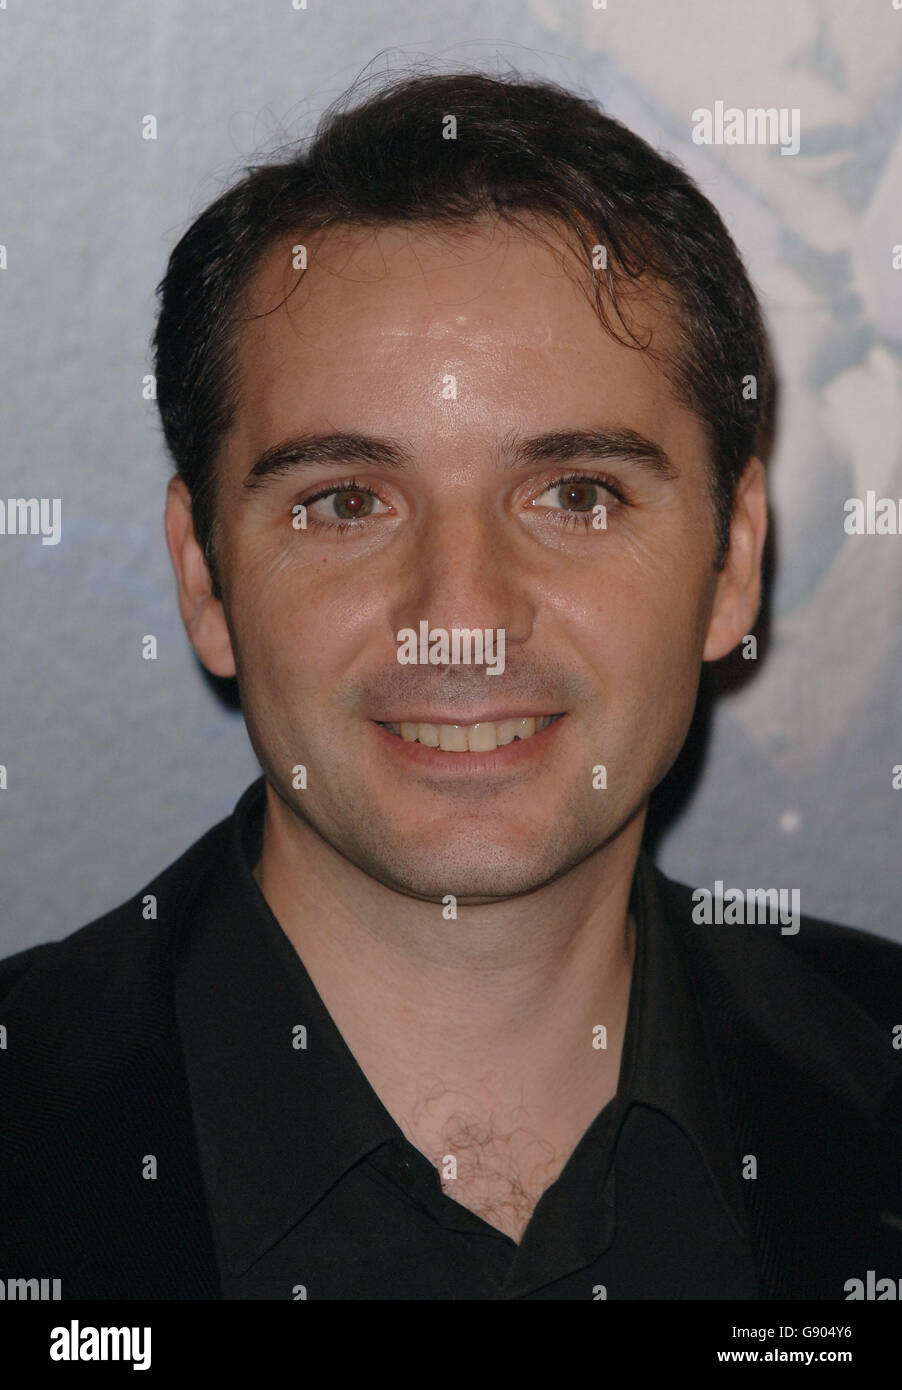 Character Designer Carlos Grangel arrives for the UK premiere of 'Corpse Bride', at the Vue West End cinema, central London. Stock Photo